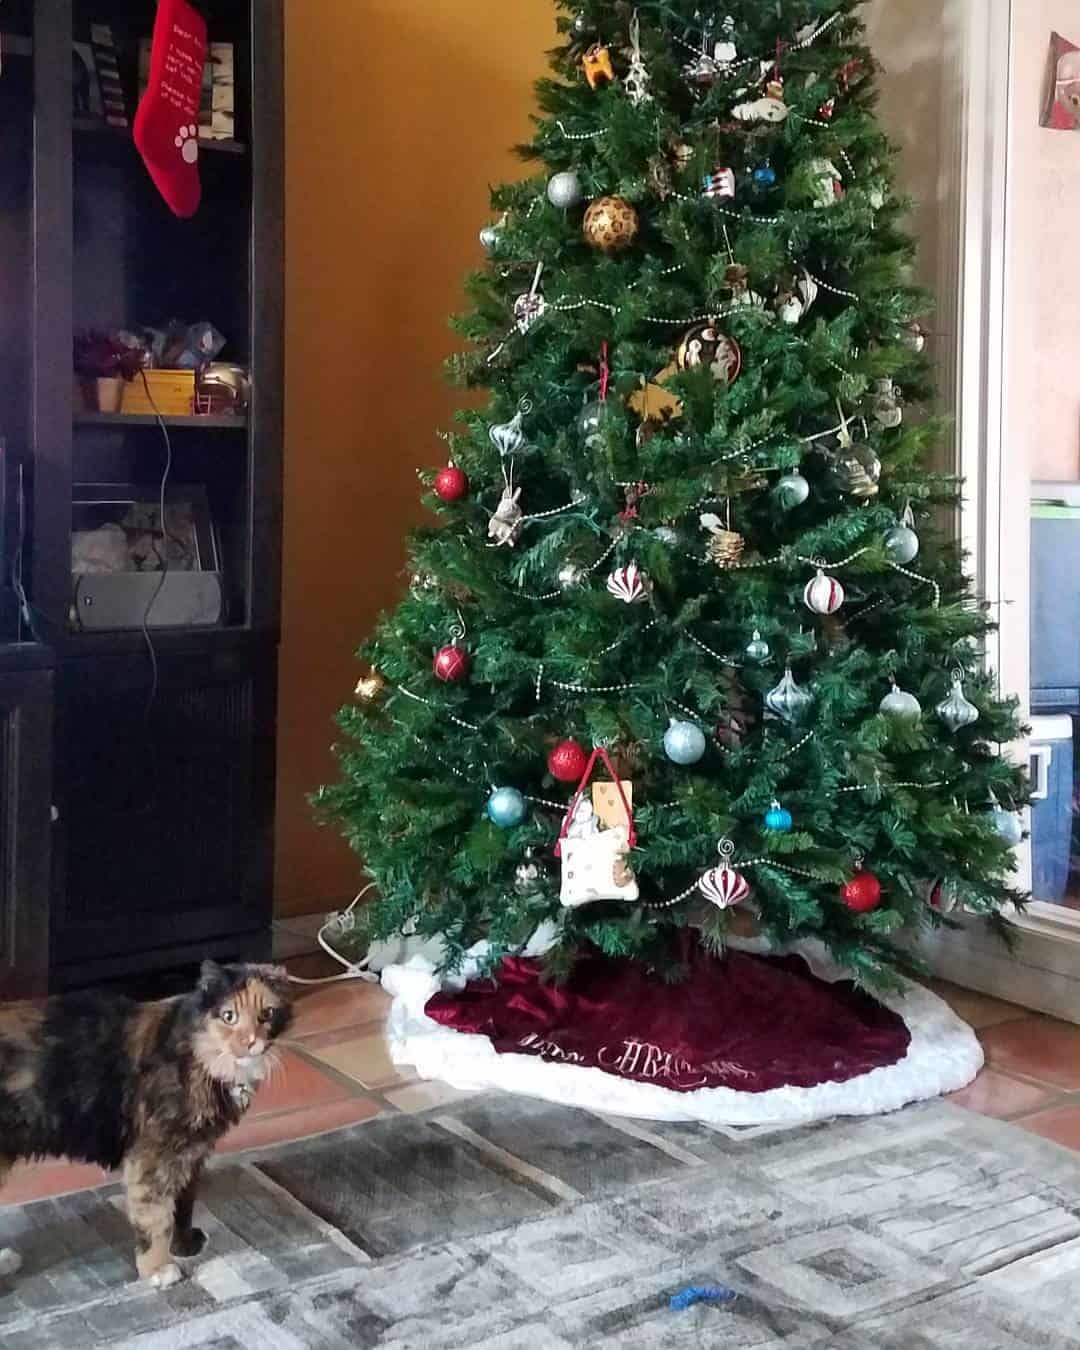 "All I want for Christmas is a FUREVER home"